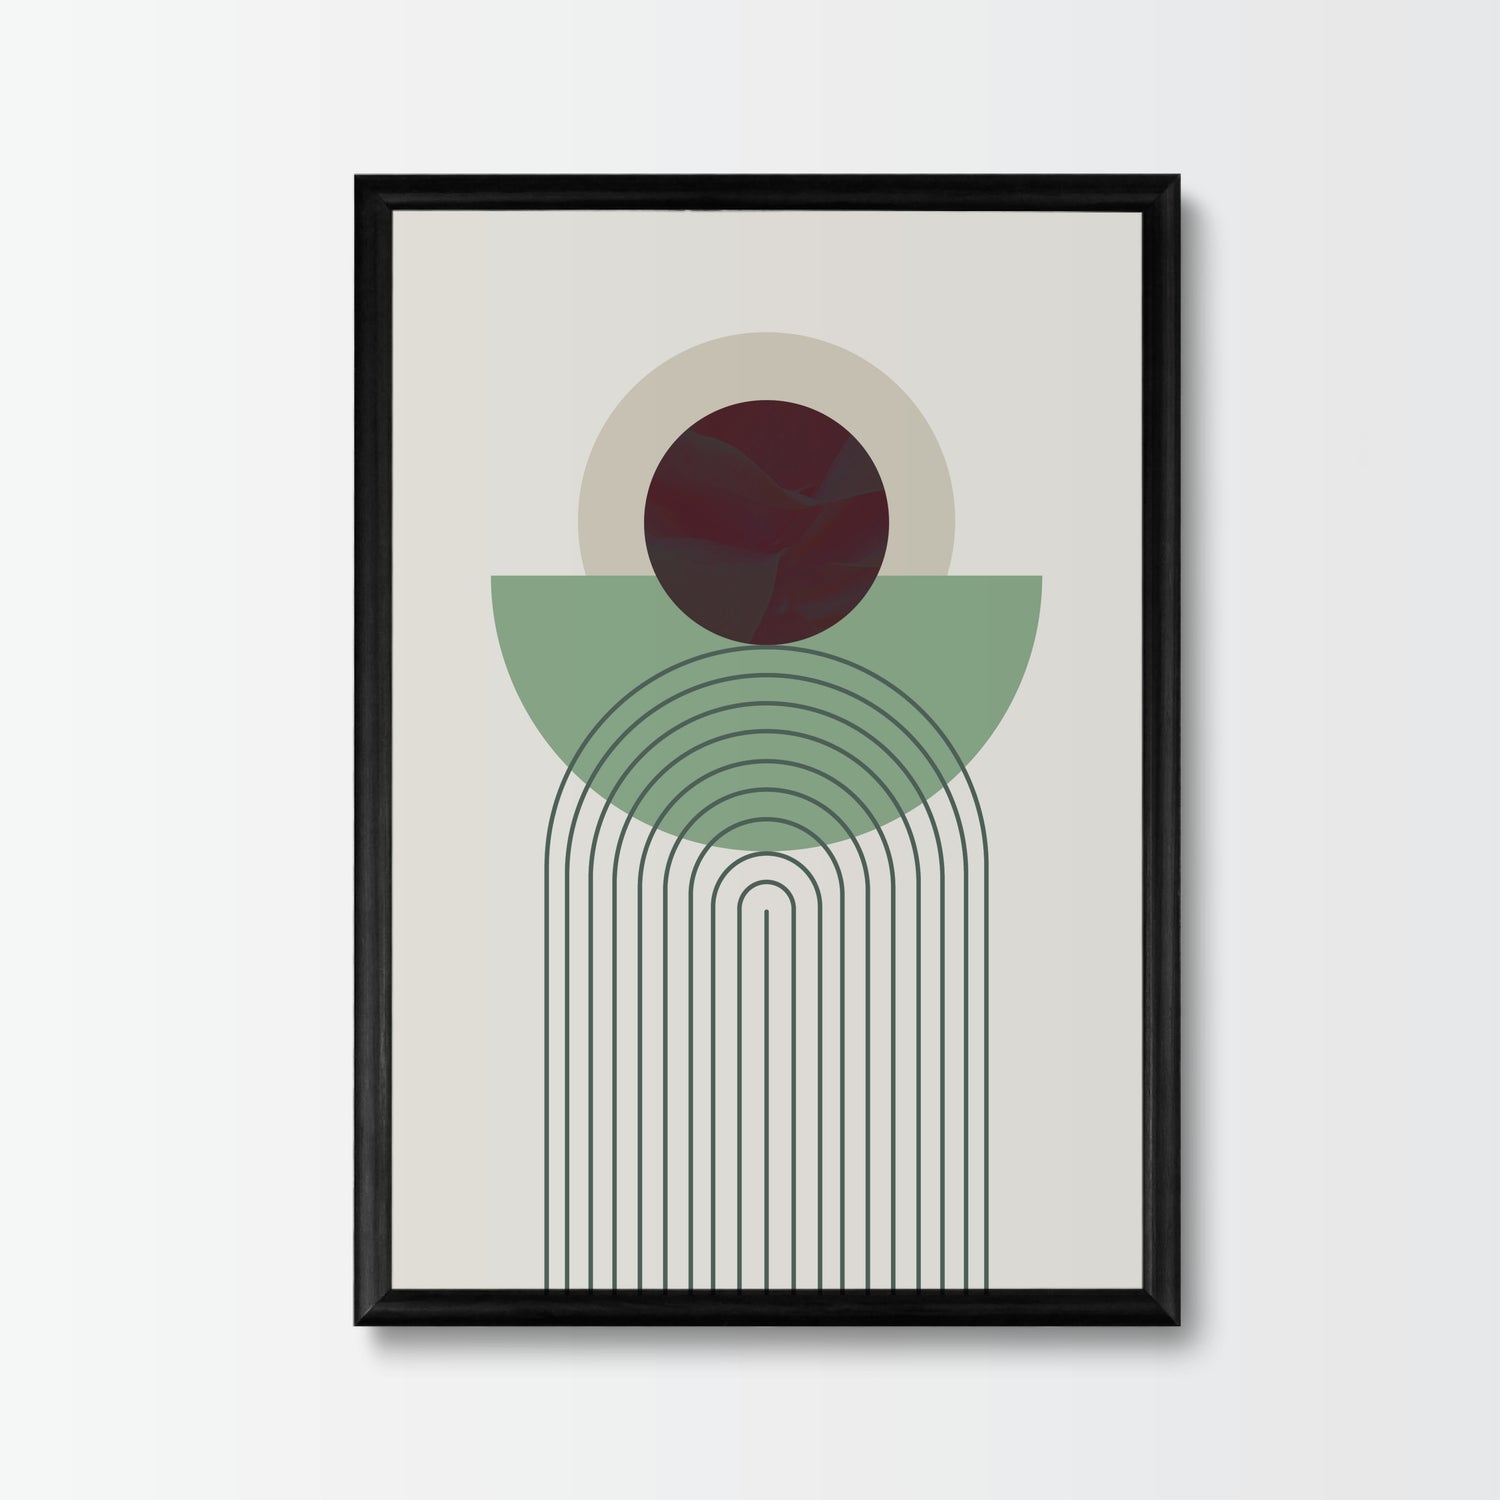 Poster New Beginnings - Add sophistication to your home